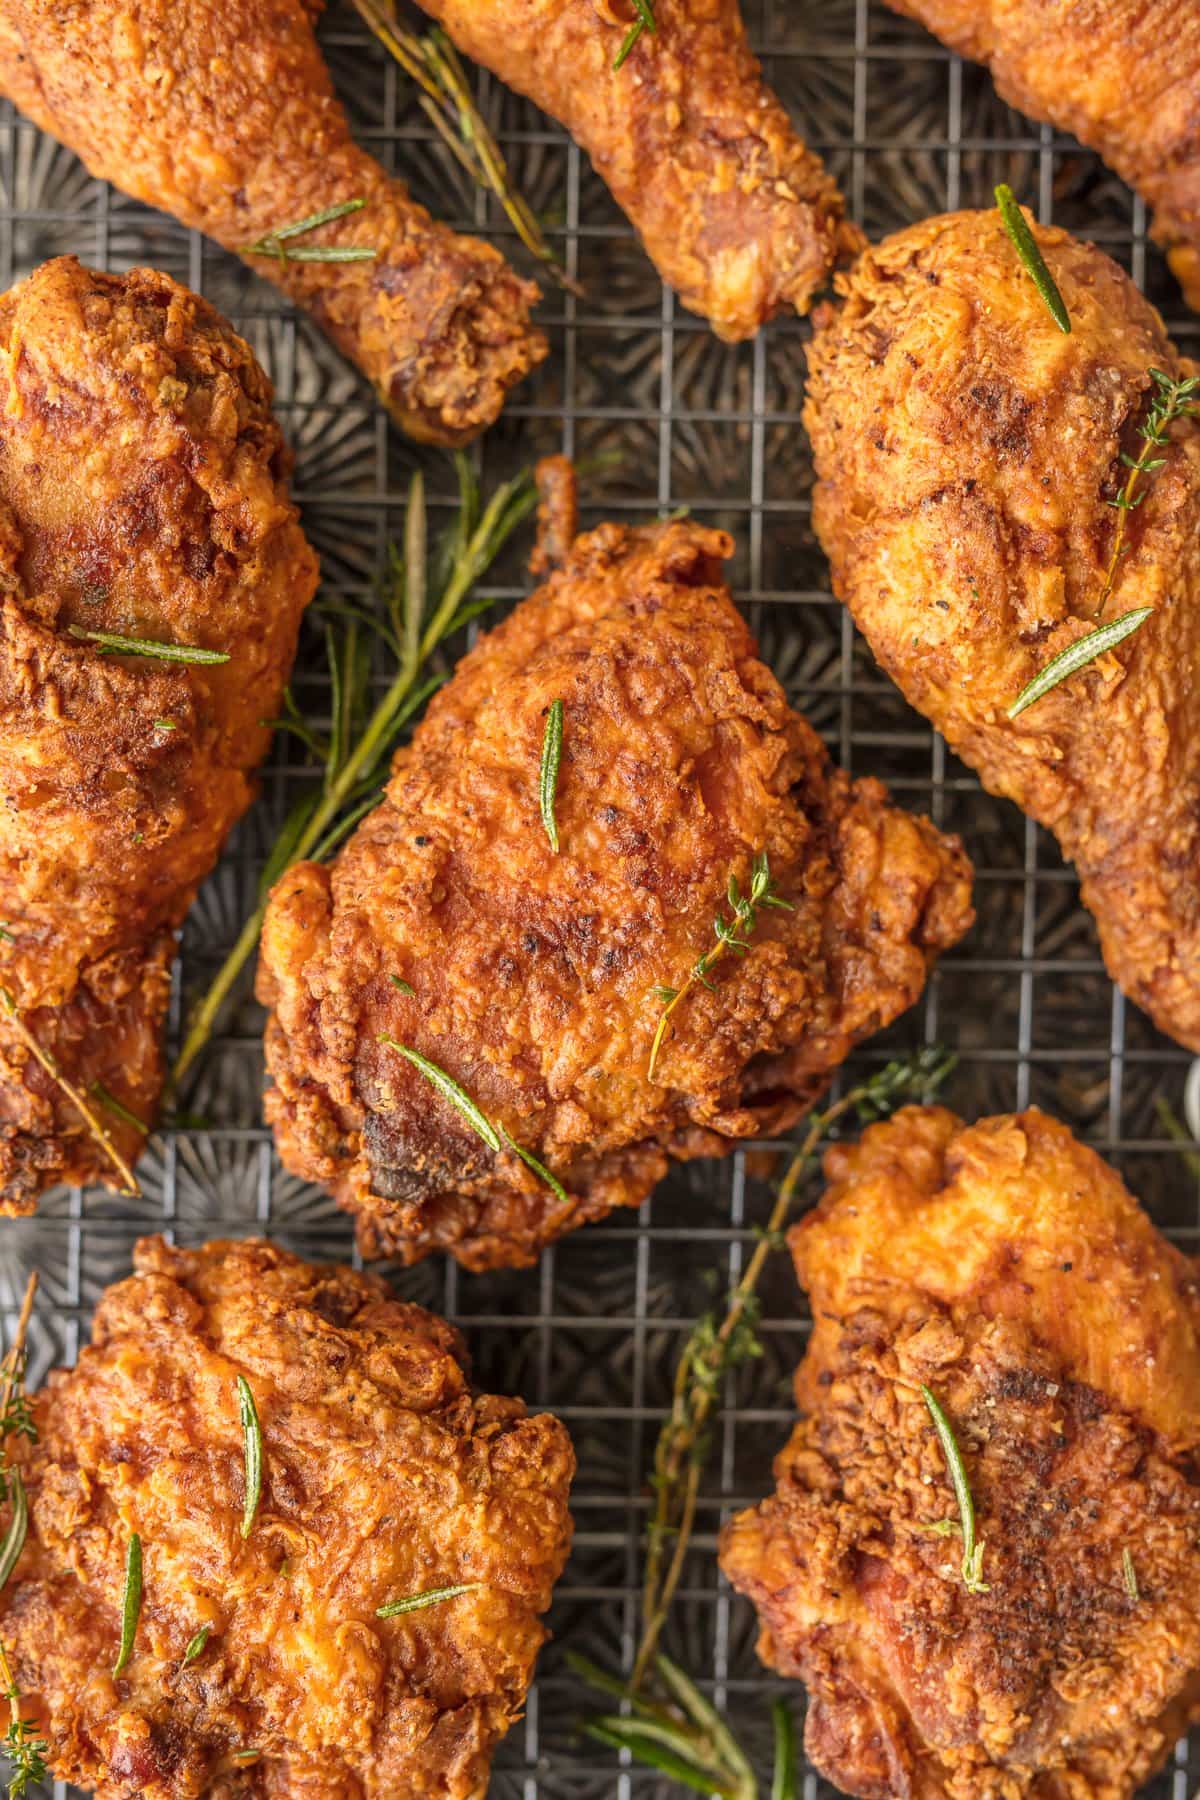 up close picture of fried chicken with rosemary